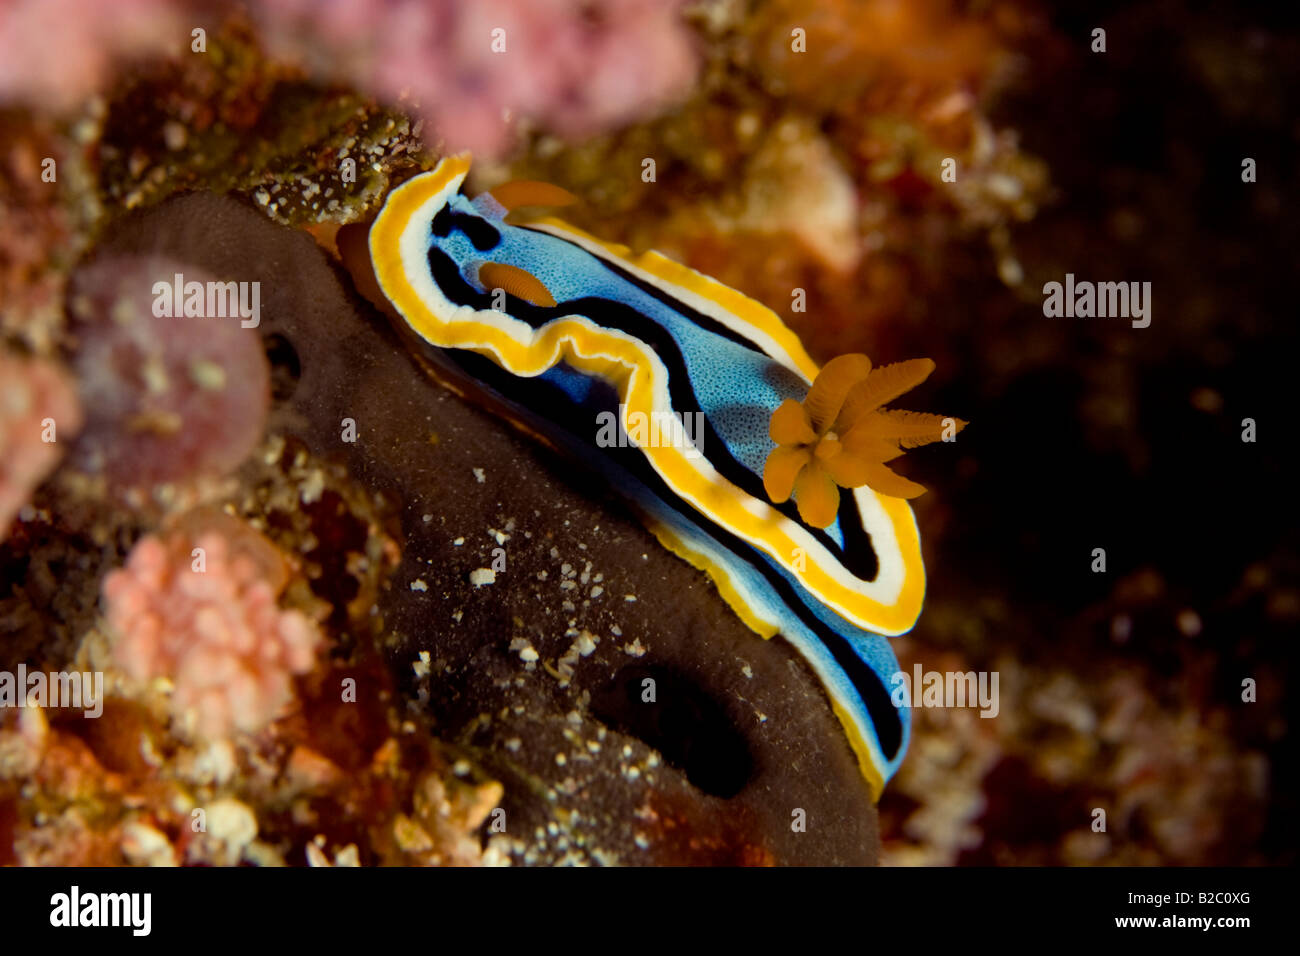 A blue and yellow chrodorididae eating coral in the warm waters of Indonesia. Stock Photo